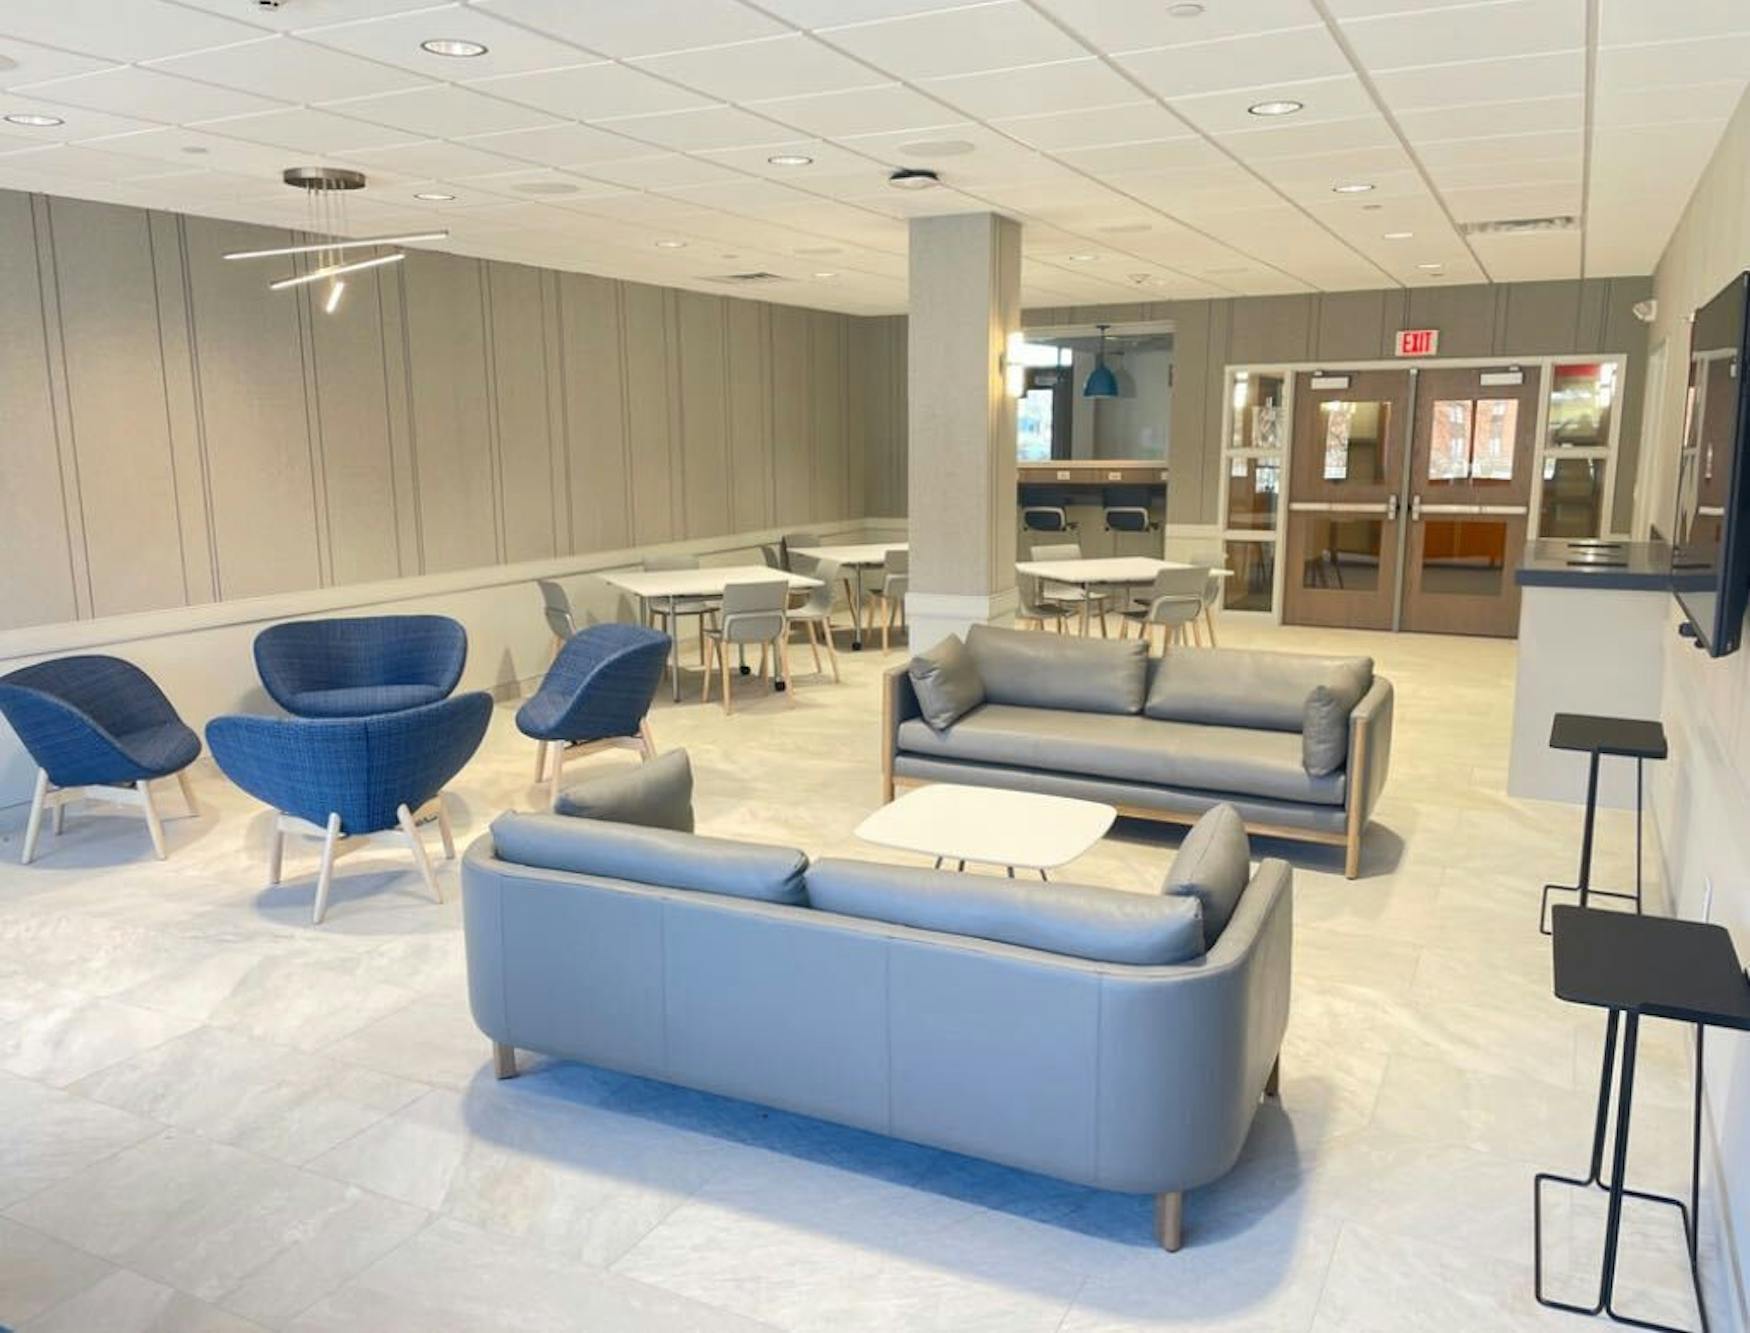 Before-and-after photos show the renovation of the Feldberg student lounge.